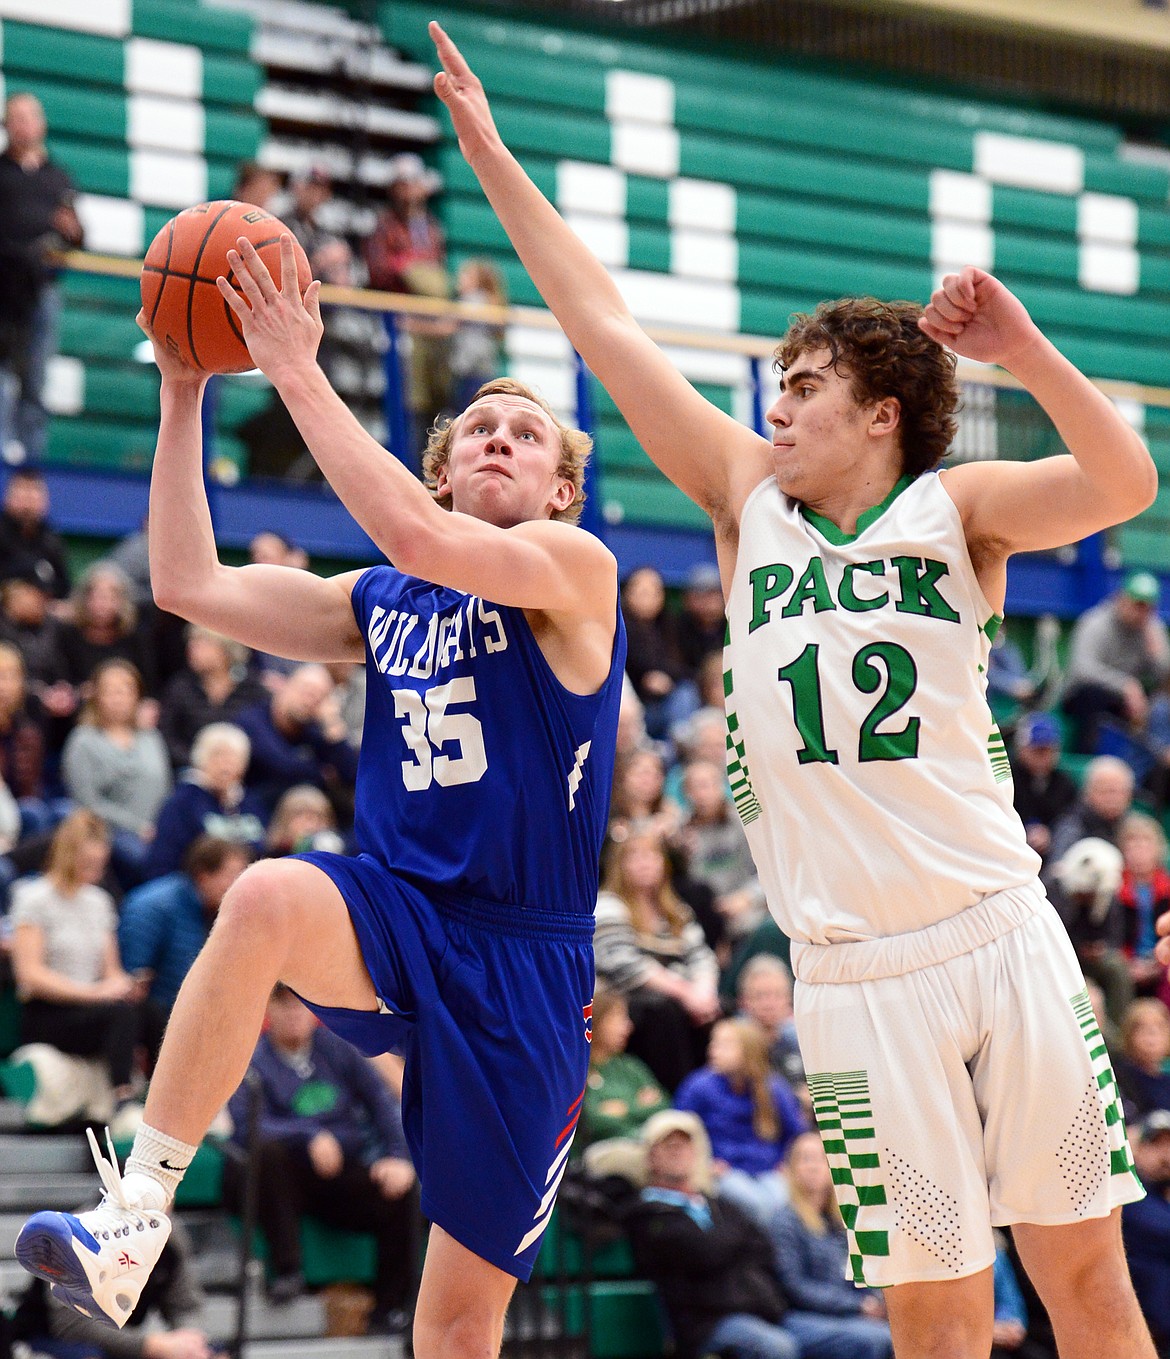 Columbia Falls' Allec Knapton drives to the basket against Glacier's Weston Price in the second half at Glacier High School on Thursday. (Casey Kreider/Daily Inter Lake)